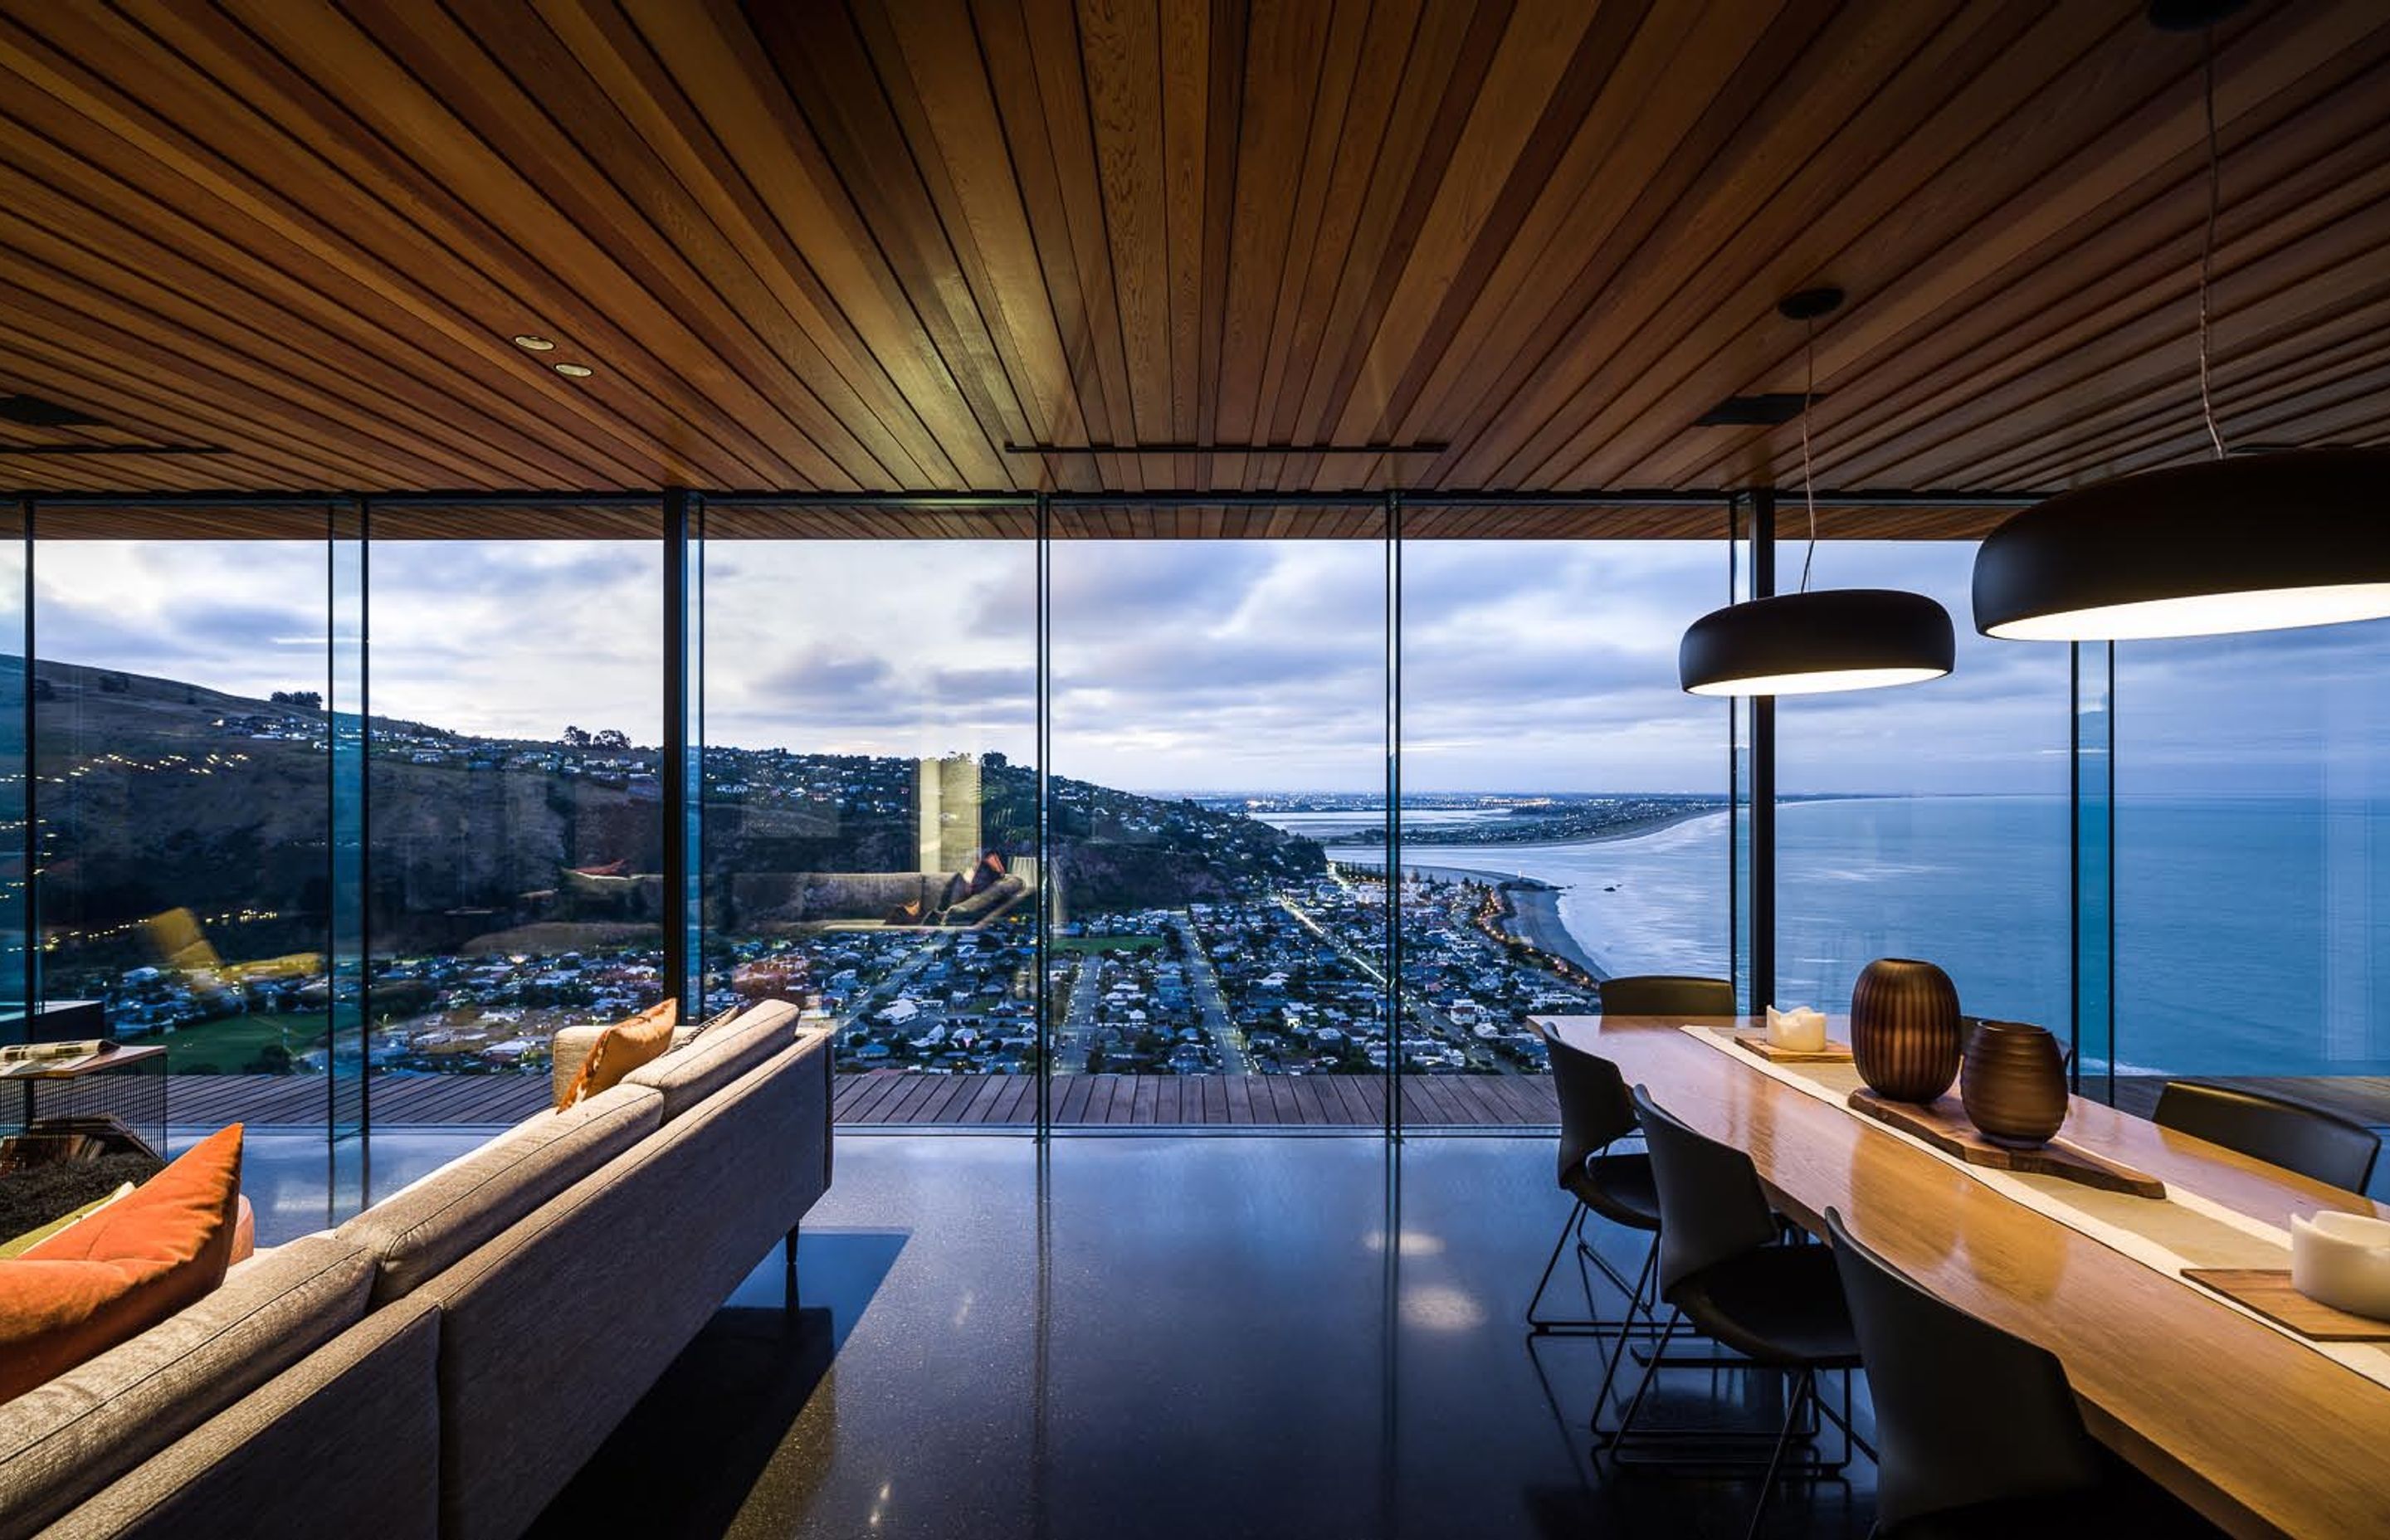 Floor-to-ceiling glazing in the living pavilion looks out over the ocean and towards Christchurch city.